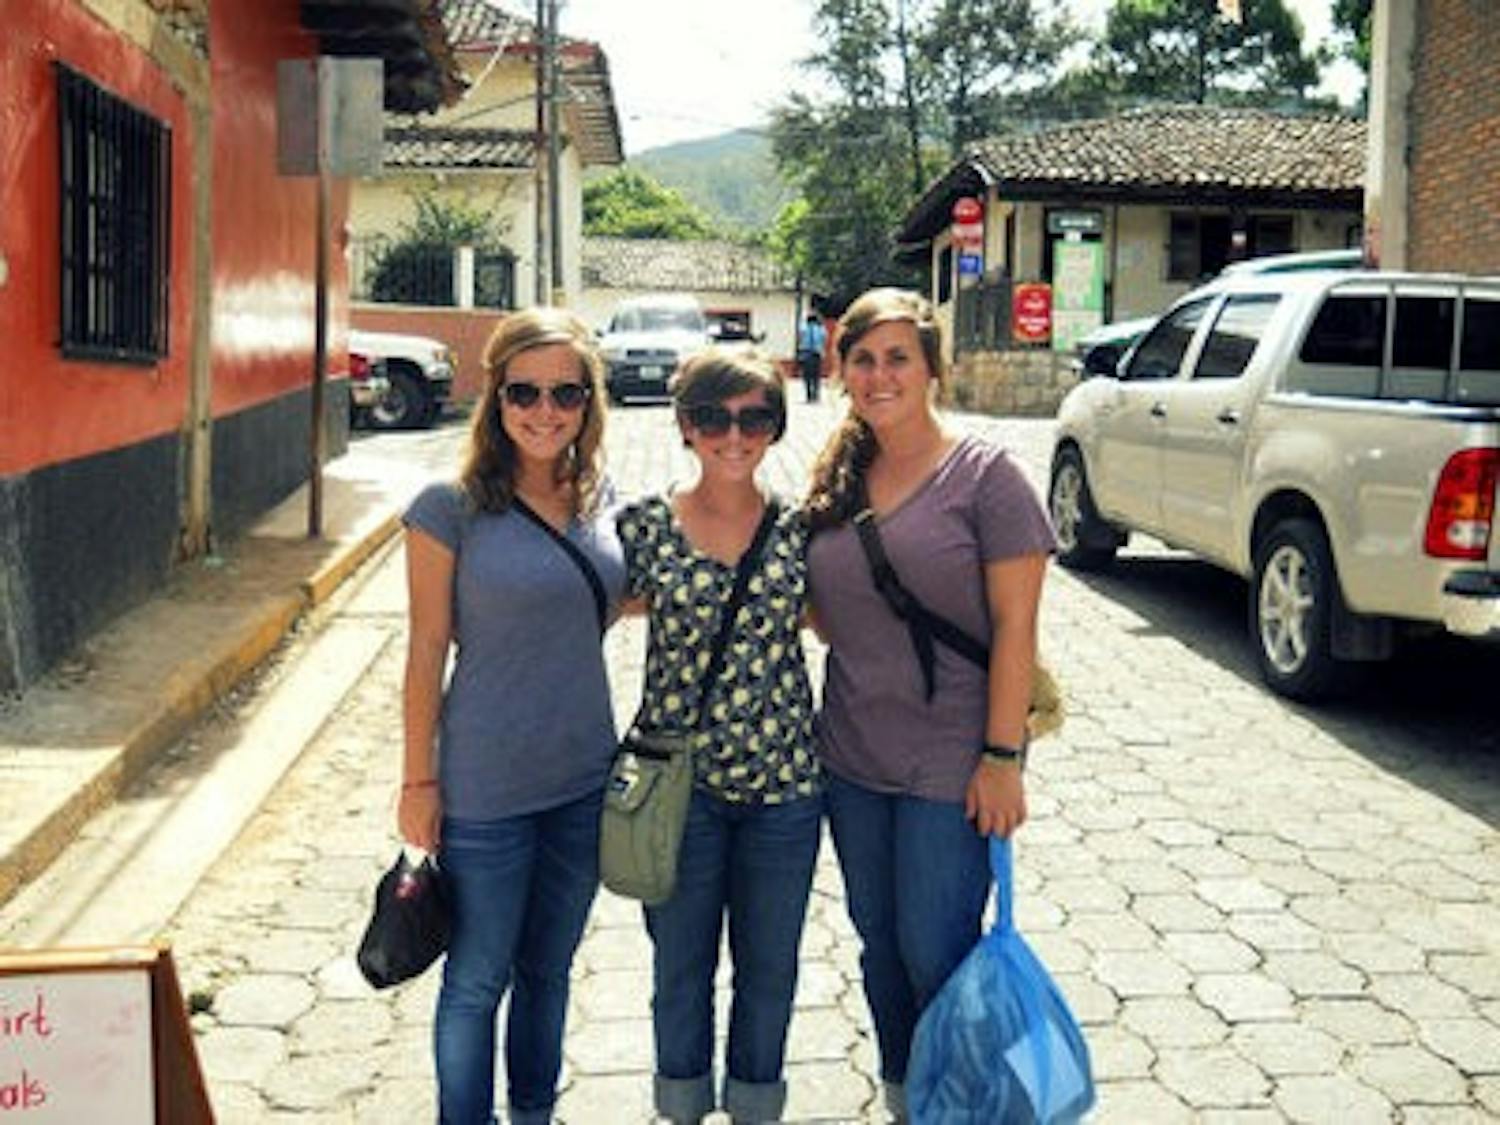 Quadruplets Sarah, Cailtin and Mary Haynes together on their mission trip to Honduras. (CONTRIBUTED)